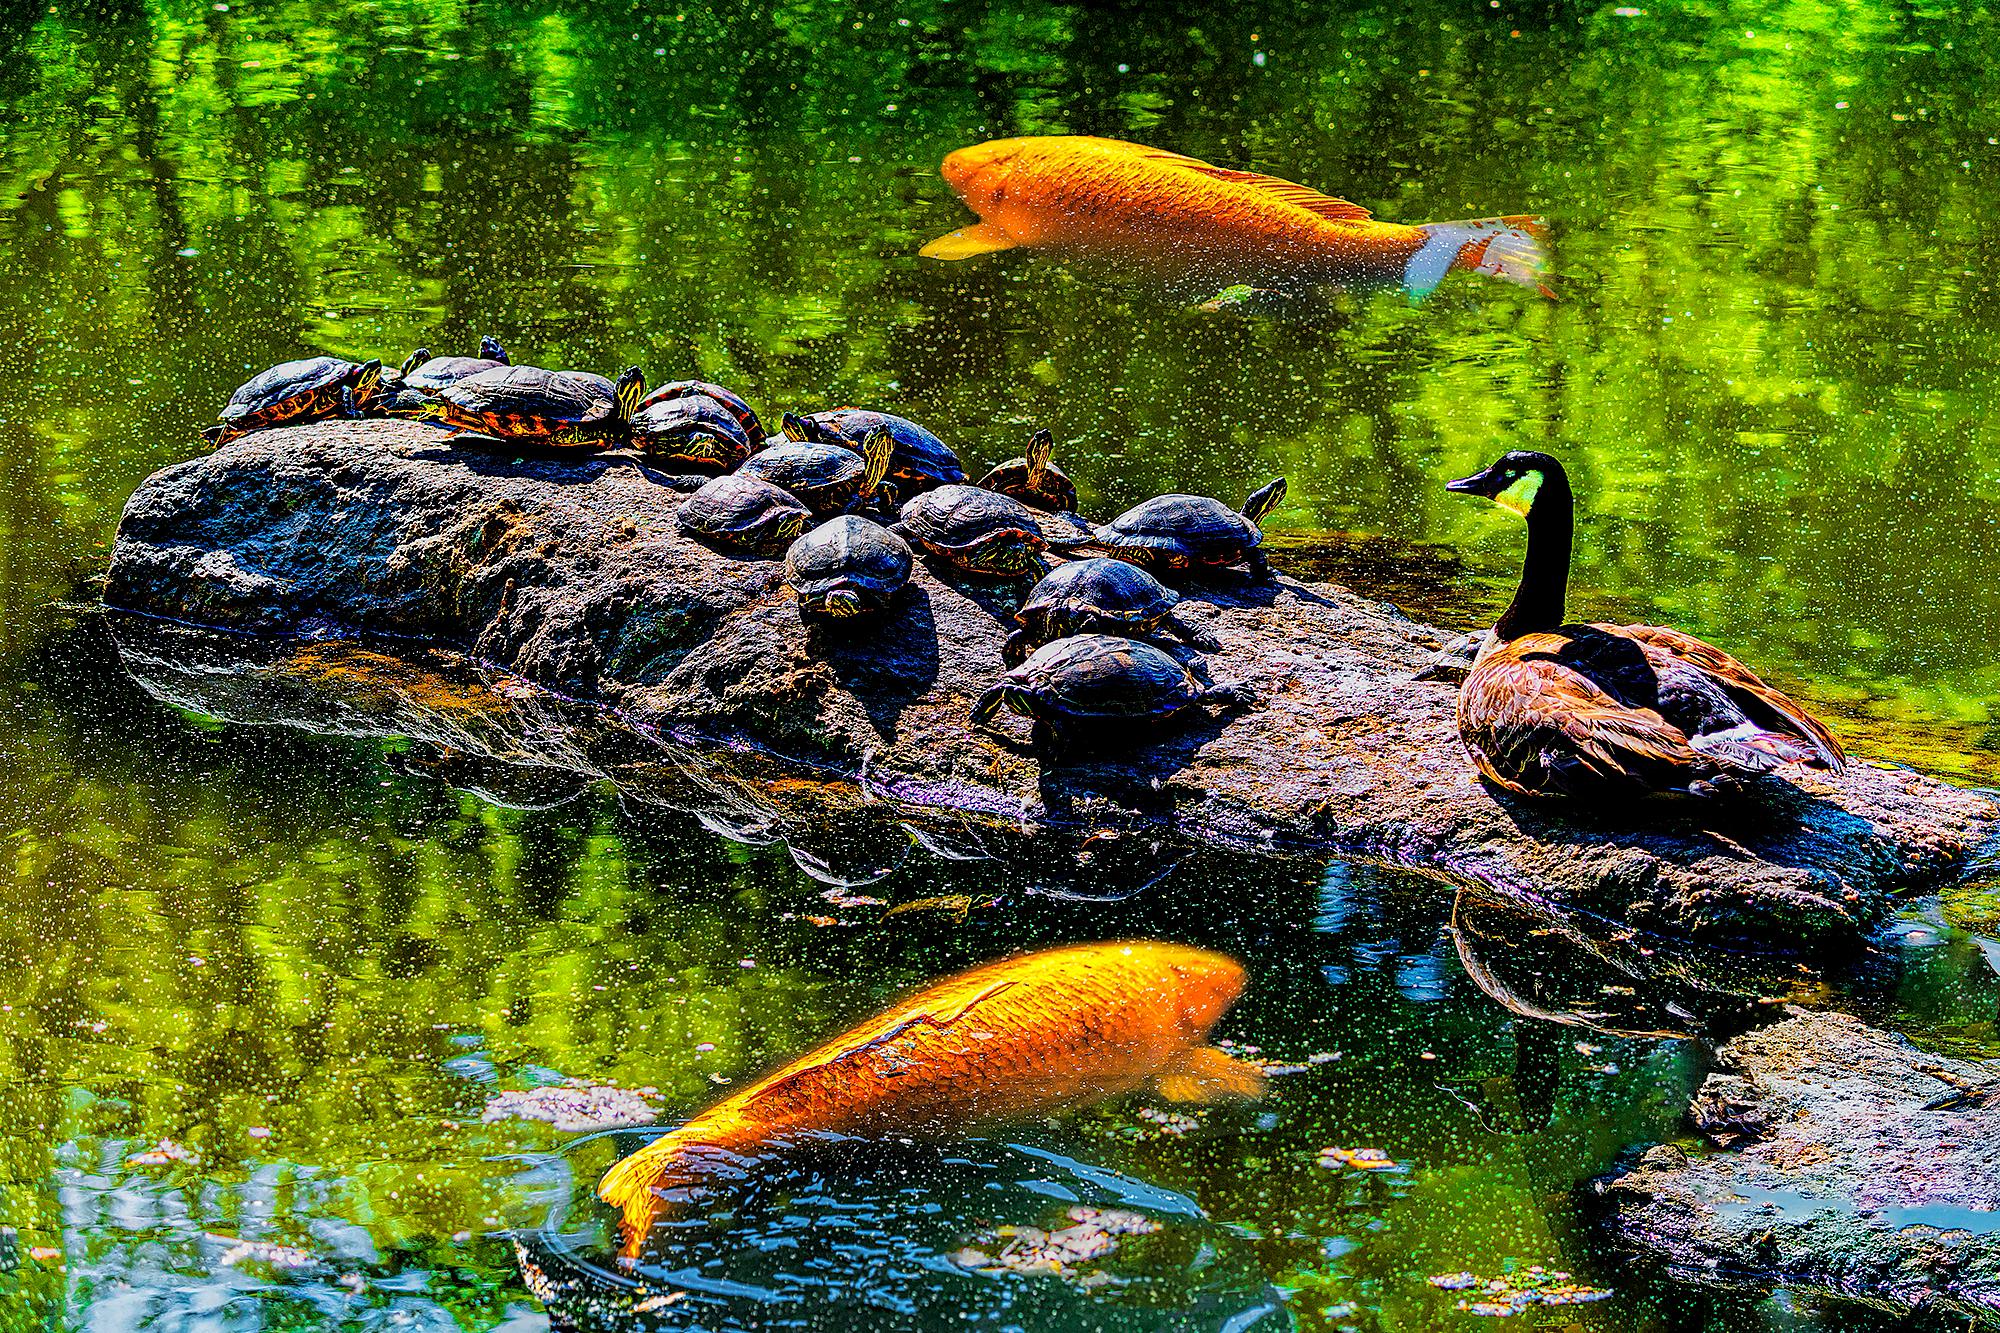 Duck, Turtles and Gold Fish in Central Park Pond Basking in Sun - Post-Impressionist Photograph by Mitchell Funk